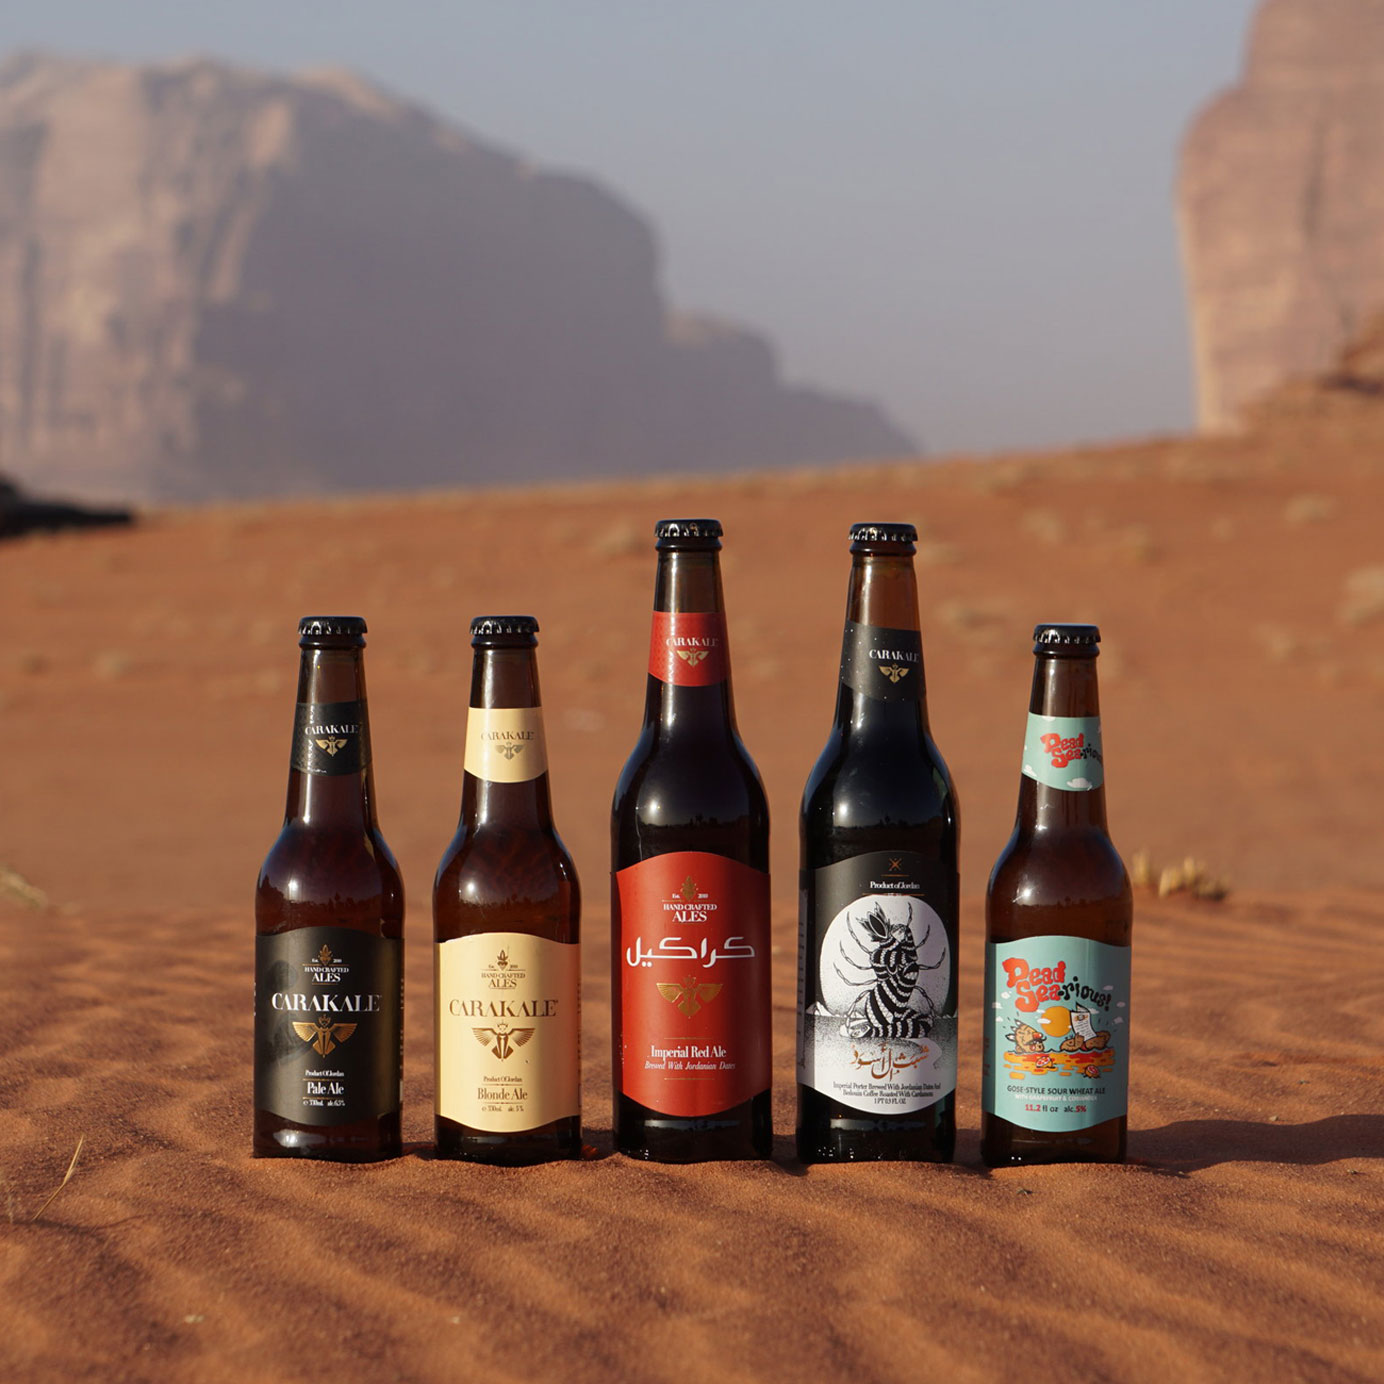 How Do You Say “Hoppy” in Arabic? The Brewer Creating Craft Beer Culture in Jordan